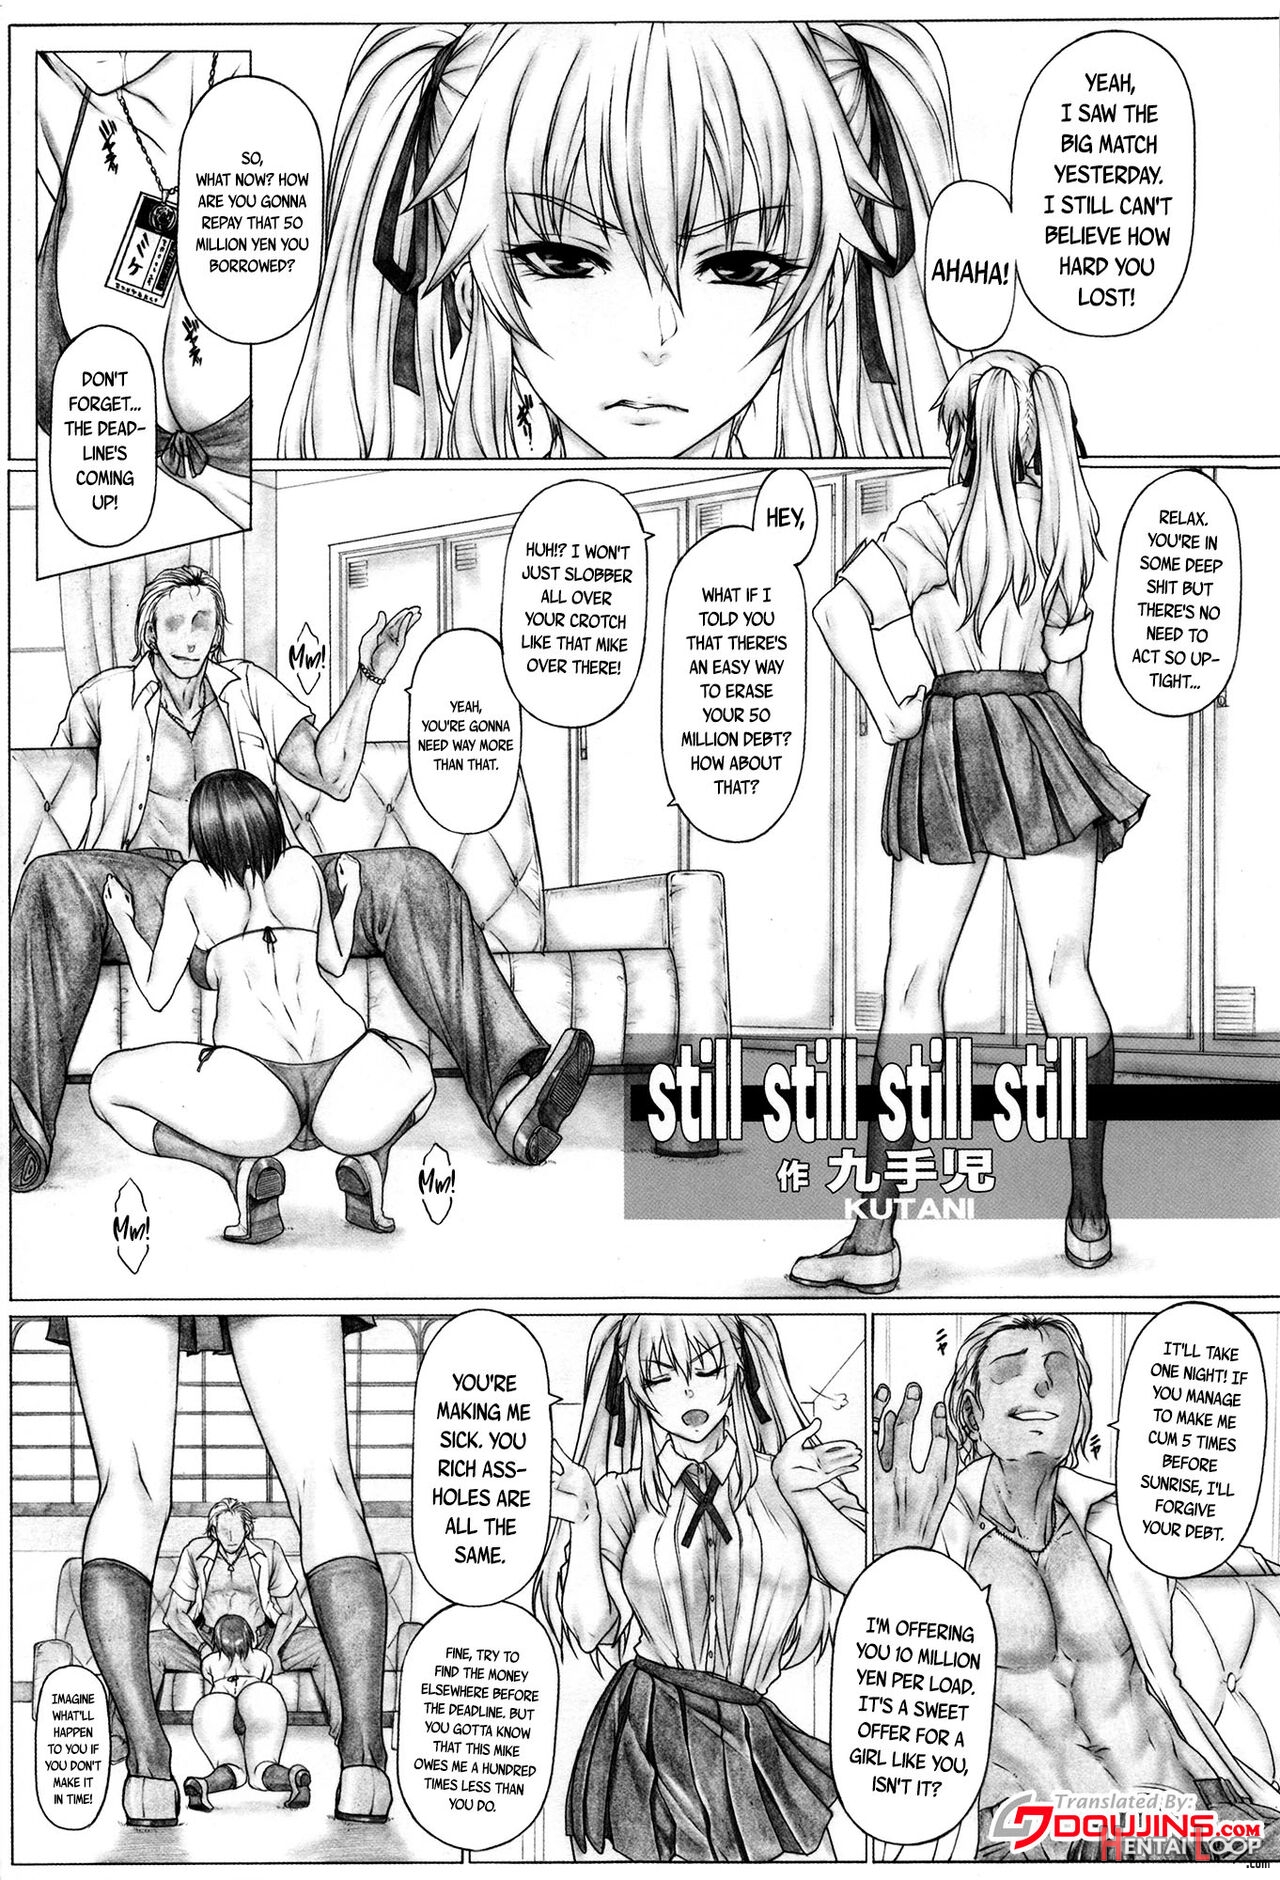 Angel’s Stroke 142 Hamegurui 5th Shot Sex Showdown About Cumming 5 Times With Just One Condom And There’s 50 Million Yen On The Line page 4